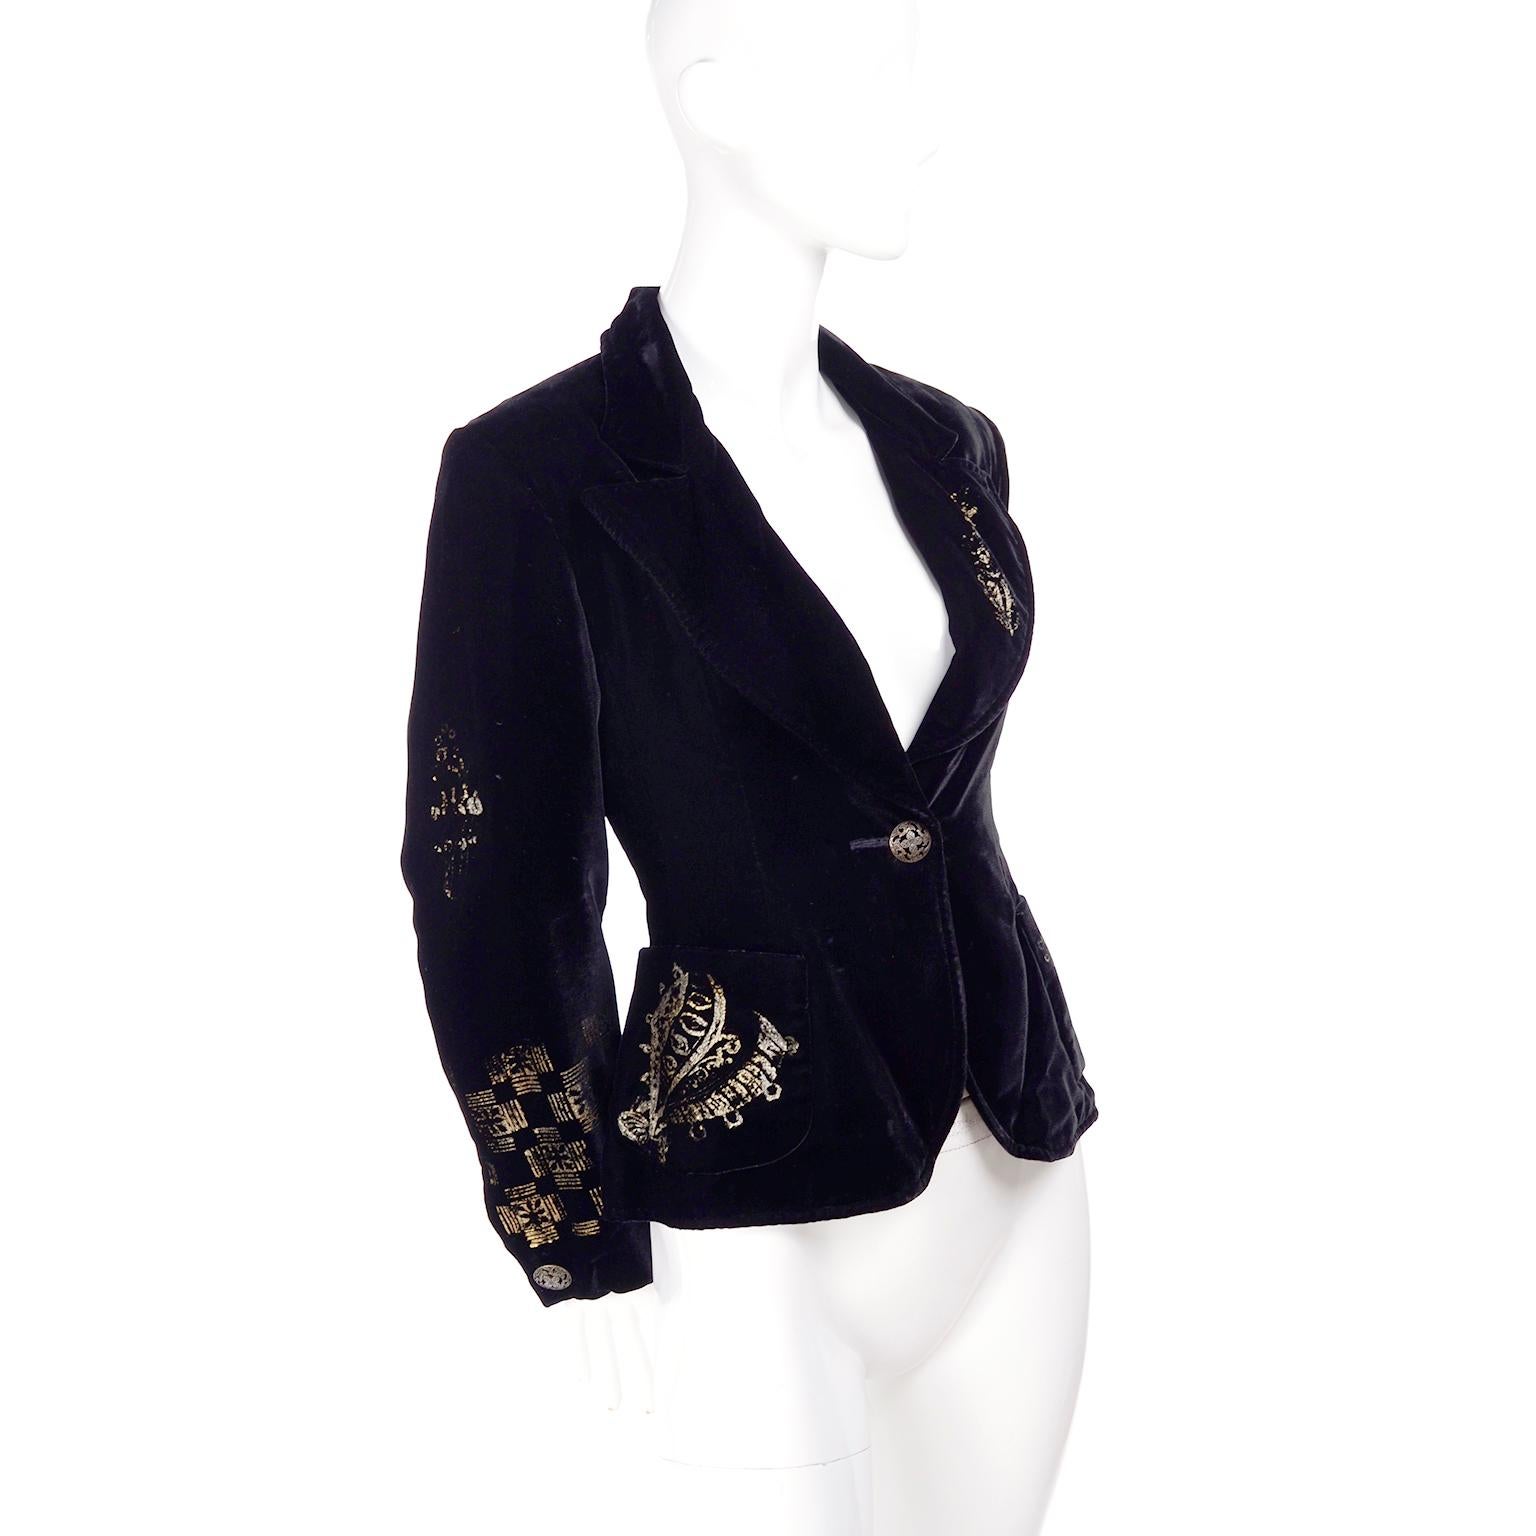 This is a lovely 1990's vintage black velvet blazer from Christian Lacroix with a stamped gold design. We love Christian Lacroix and have had many of his pieces over the years! This jacket closes with a front decorative pierced metal button, is